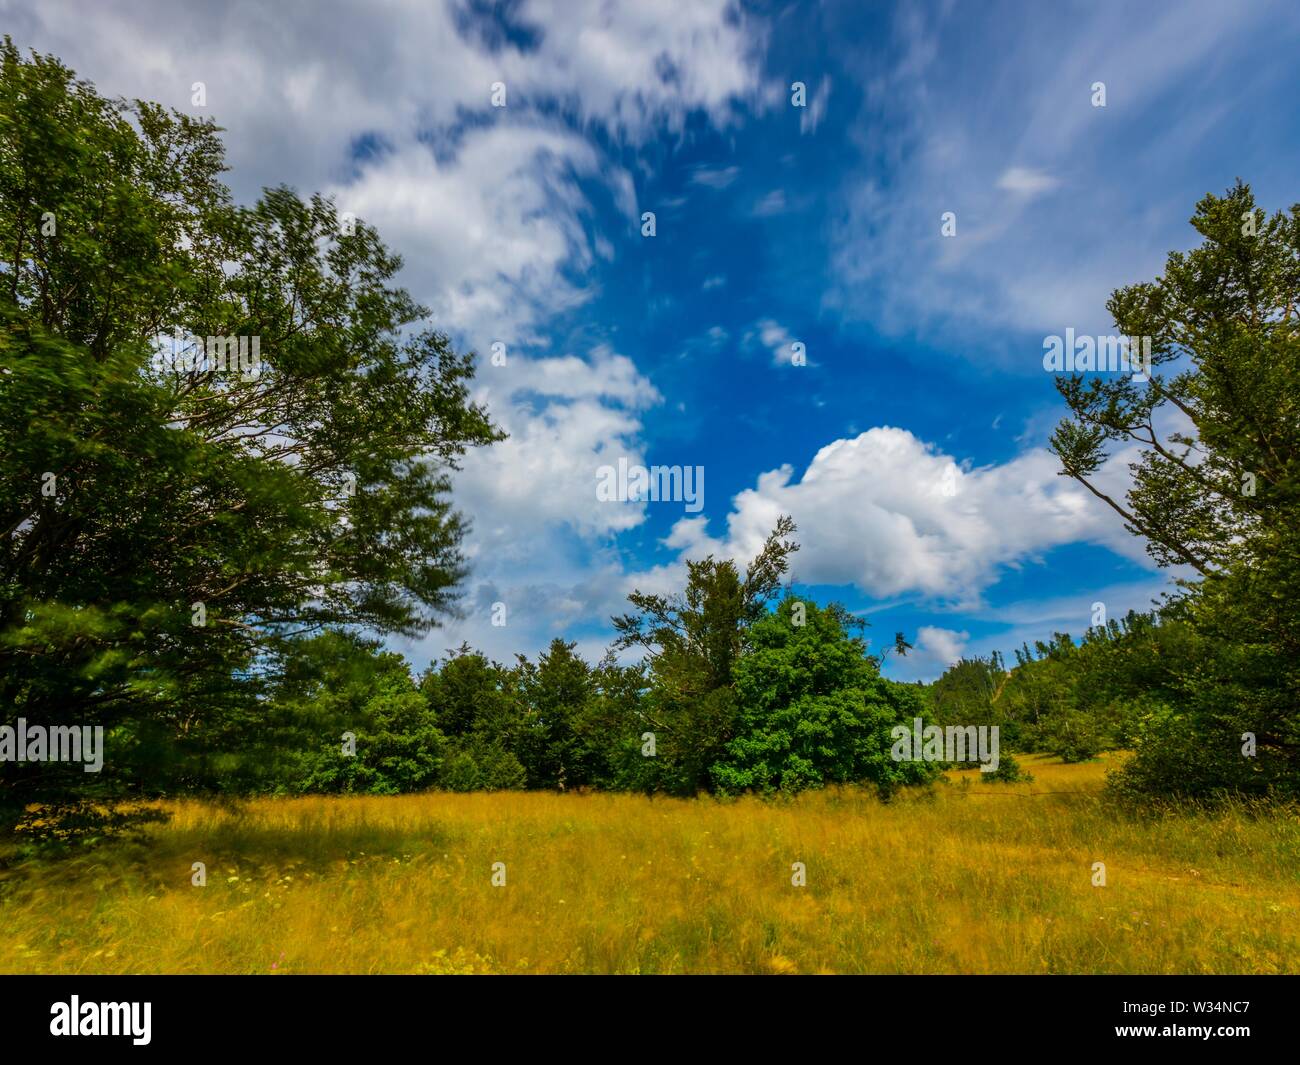 Green forest and White clouds Spring seasonal outdoors countryside scenery landscape longish exposure Gorski kotar in Croatia Europe Stock Photo